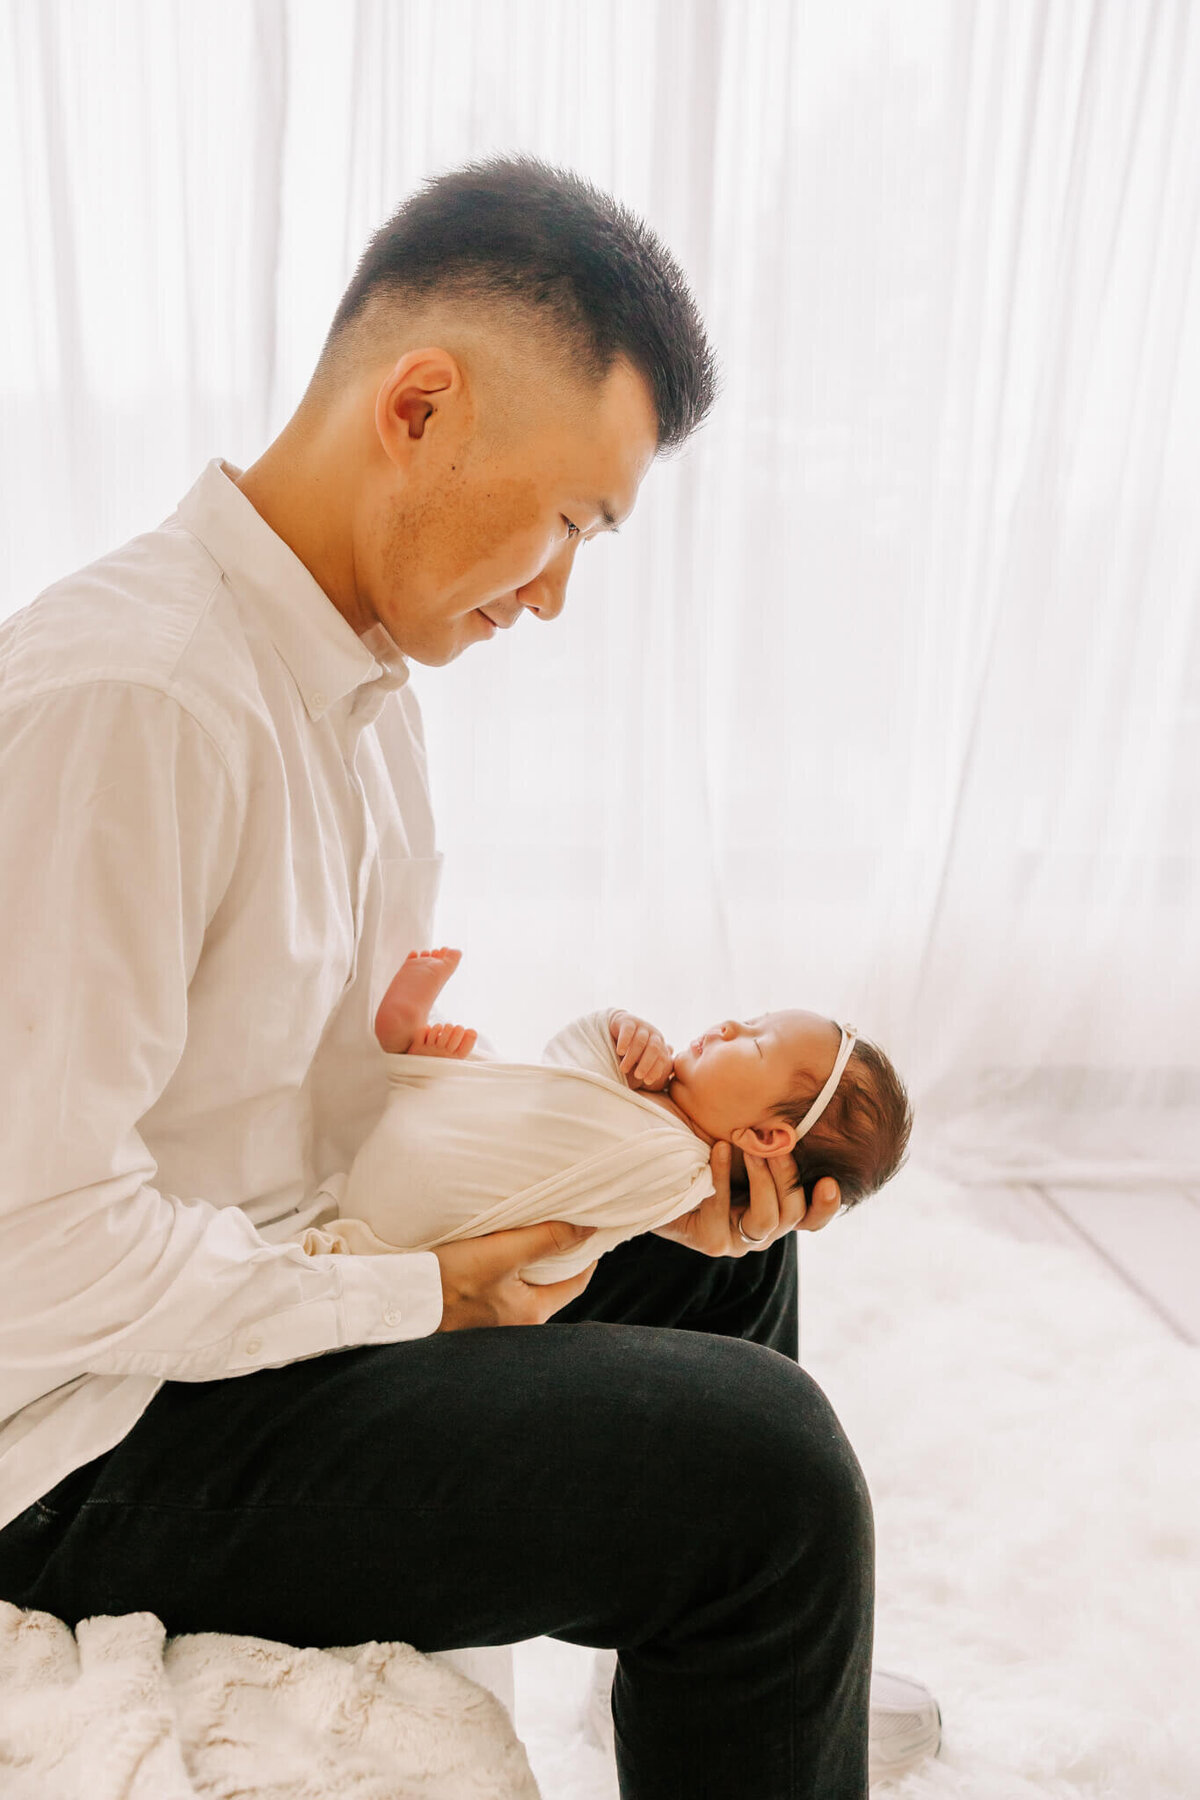 portrait of a dad wearing a white shirt and black pants sitting on the edge of a bed. he is looking down at his newborn baby girl